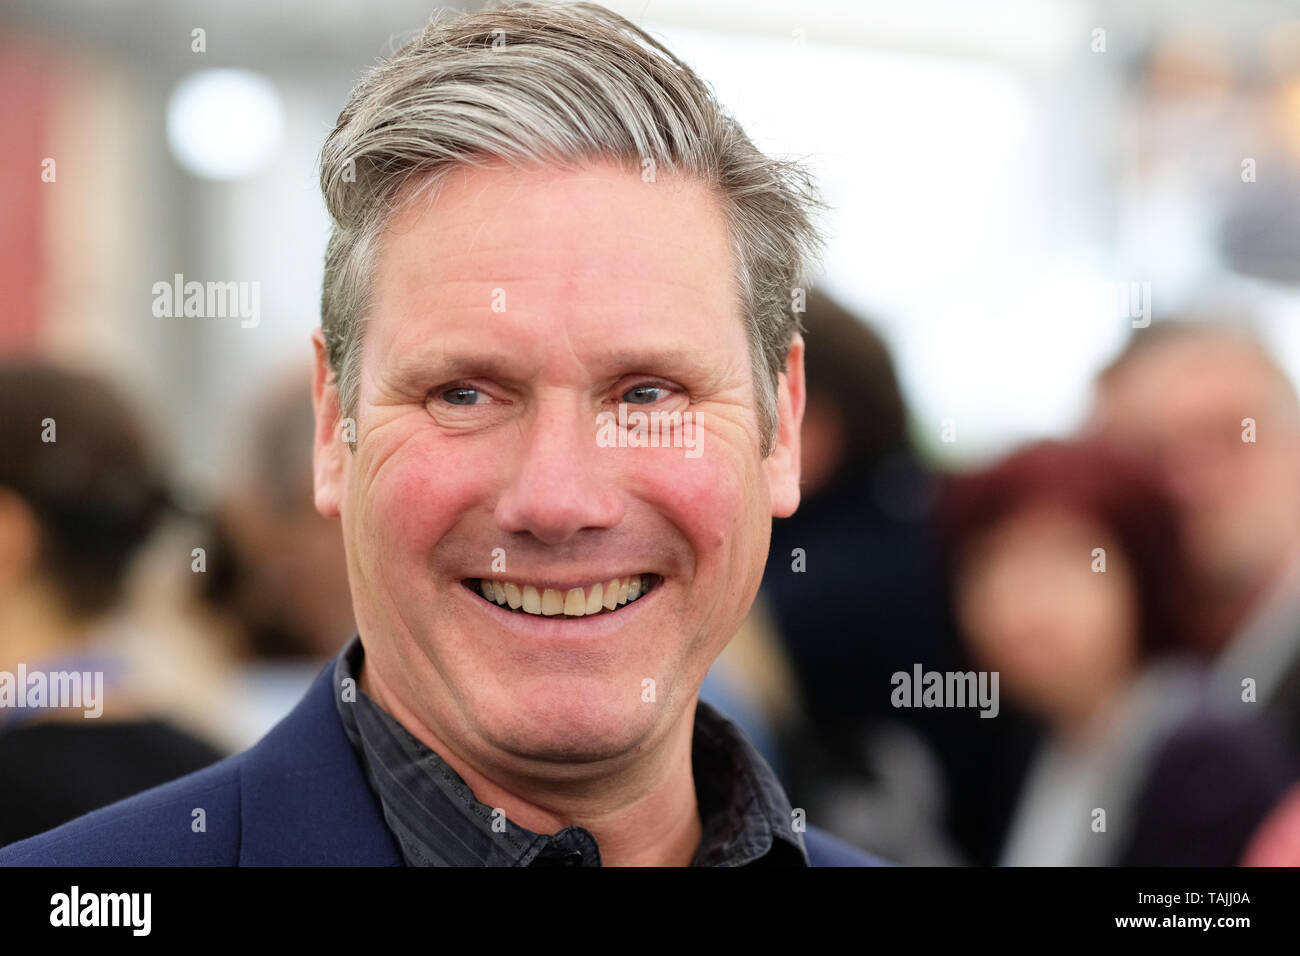 Hay Festival, Hay on Wye, Powys, Wales, UK - Sunday 26th May 2019 - Keir Starmer MP the Labour Party Shadow Brexit Secretary at the Hay Festival on Day 4 of this years Hay Festival. Photo Steven May / Alamy Live News Stock Photo